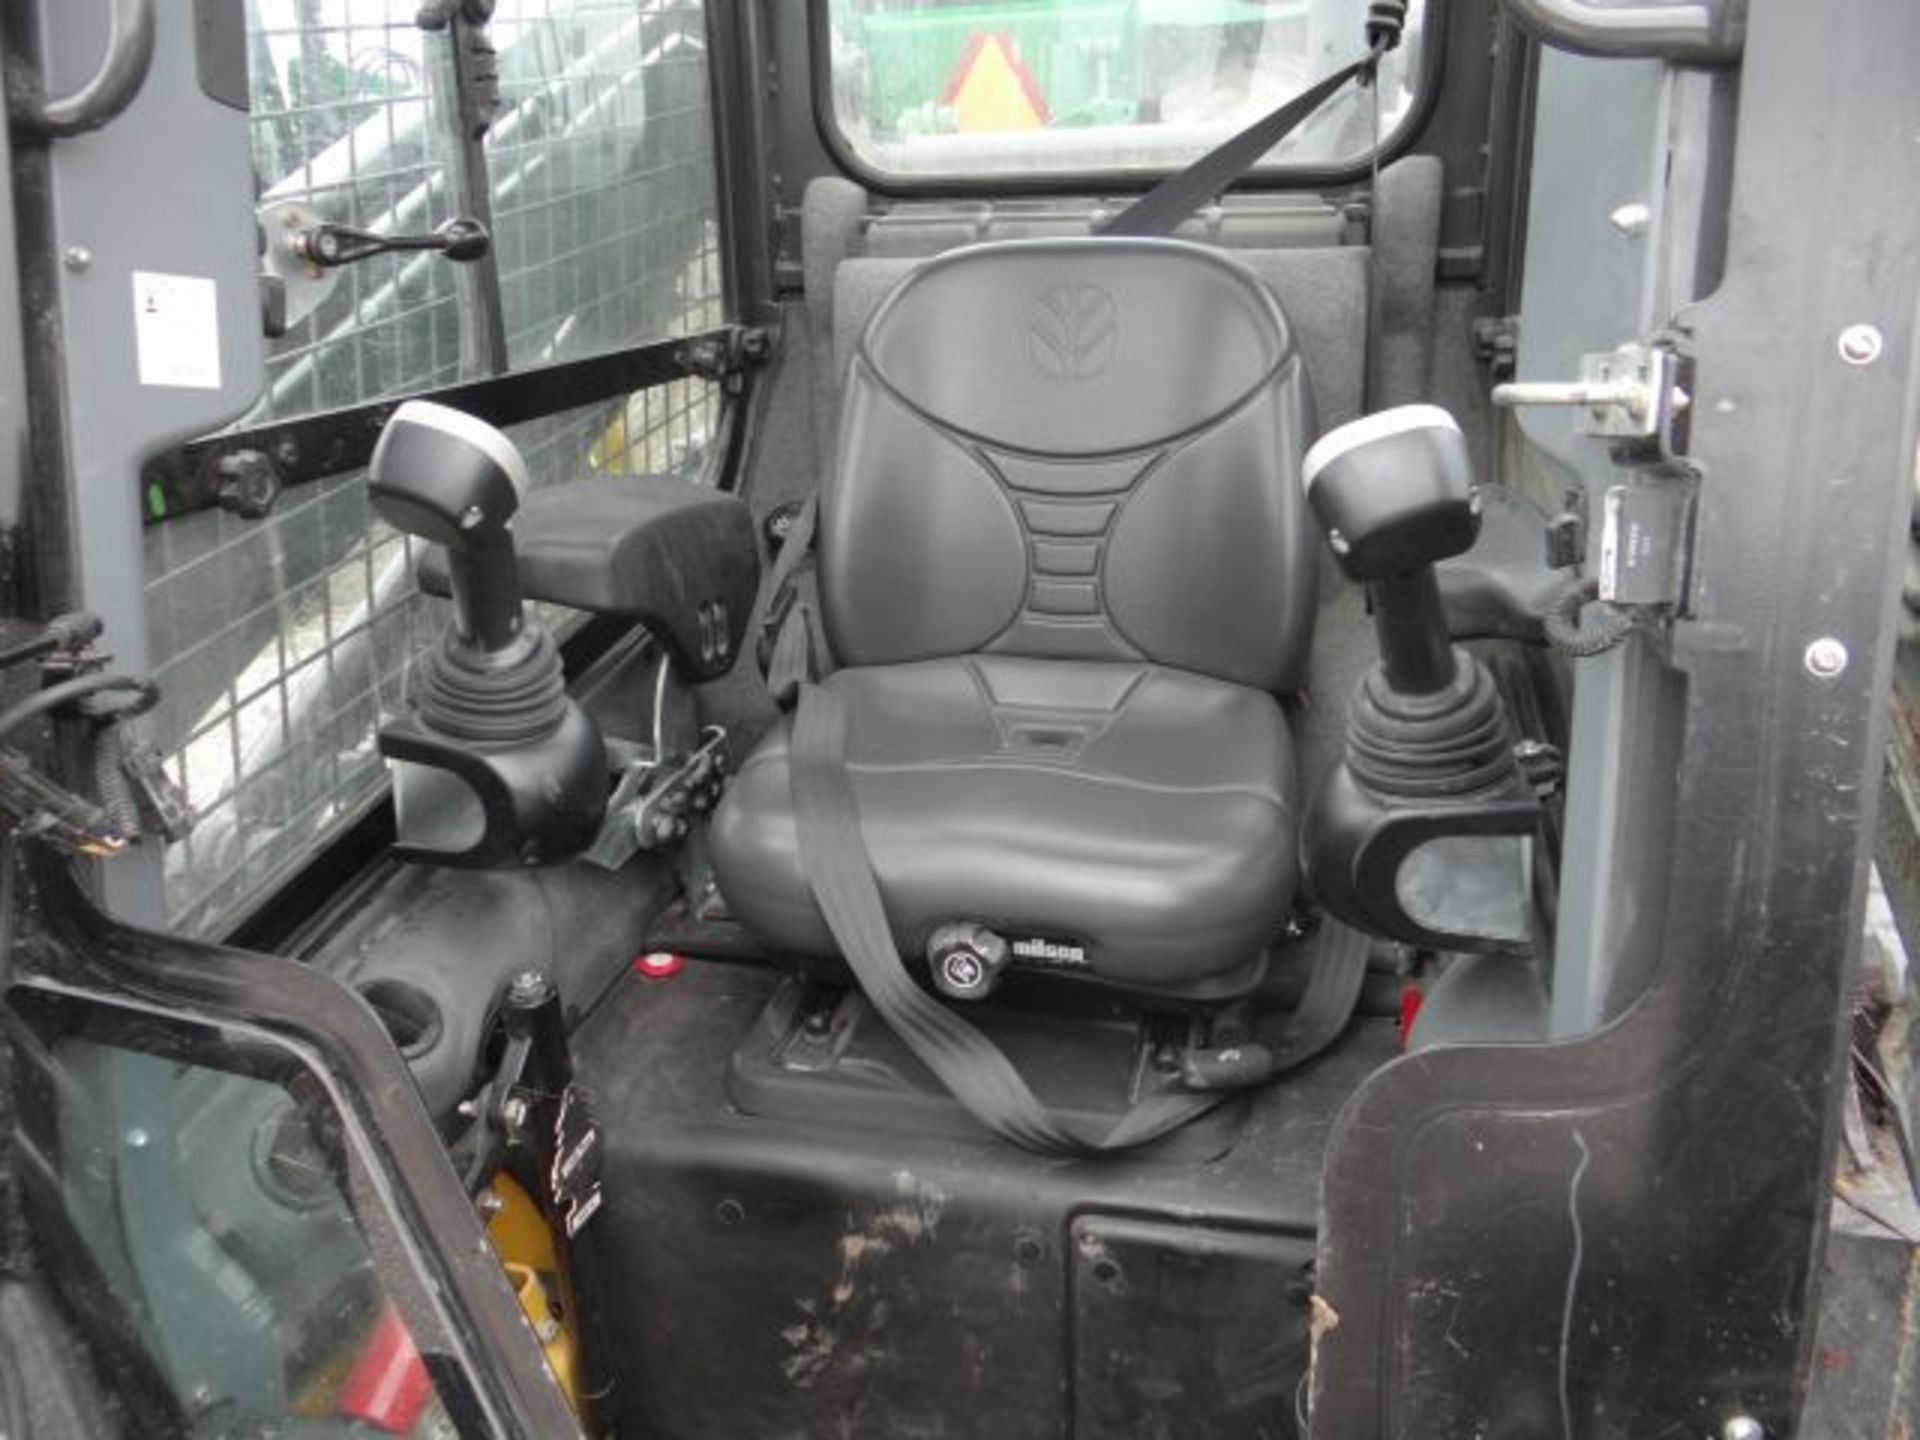 NH C232 Skid Steer, 2016 231 hrs, New in June 2016, Manual in the Shed - Bild 4 aus 4